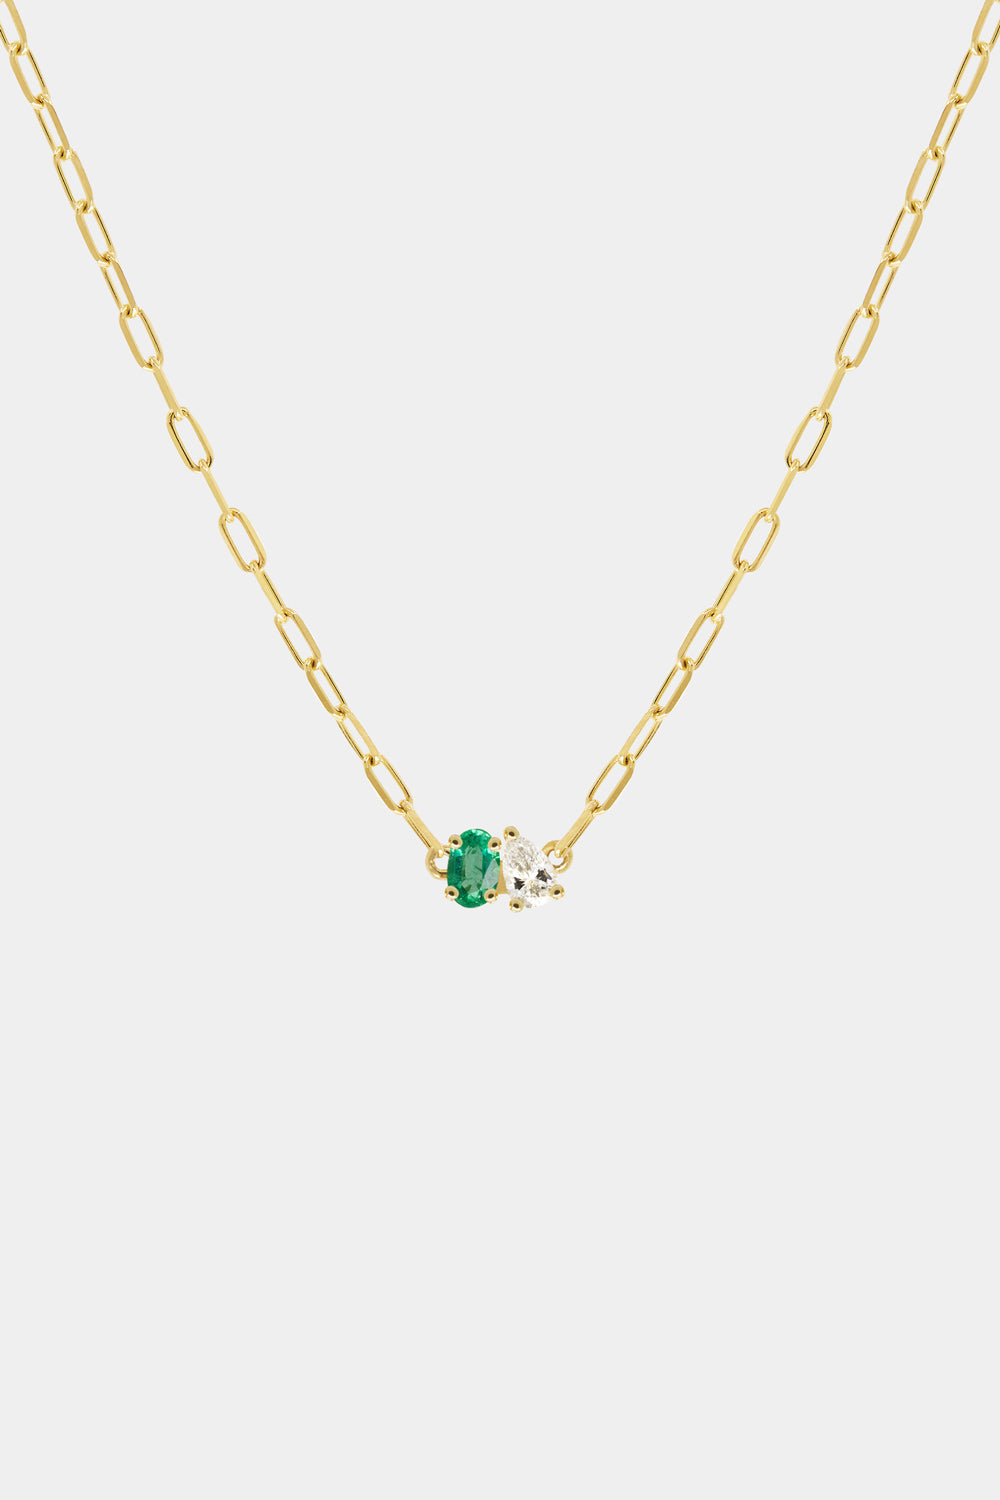 Pear Diamond and Oval Emerald Toi Et Moi Necklace | 18K Yellow Gold